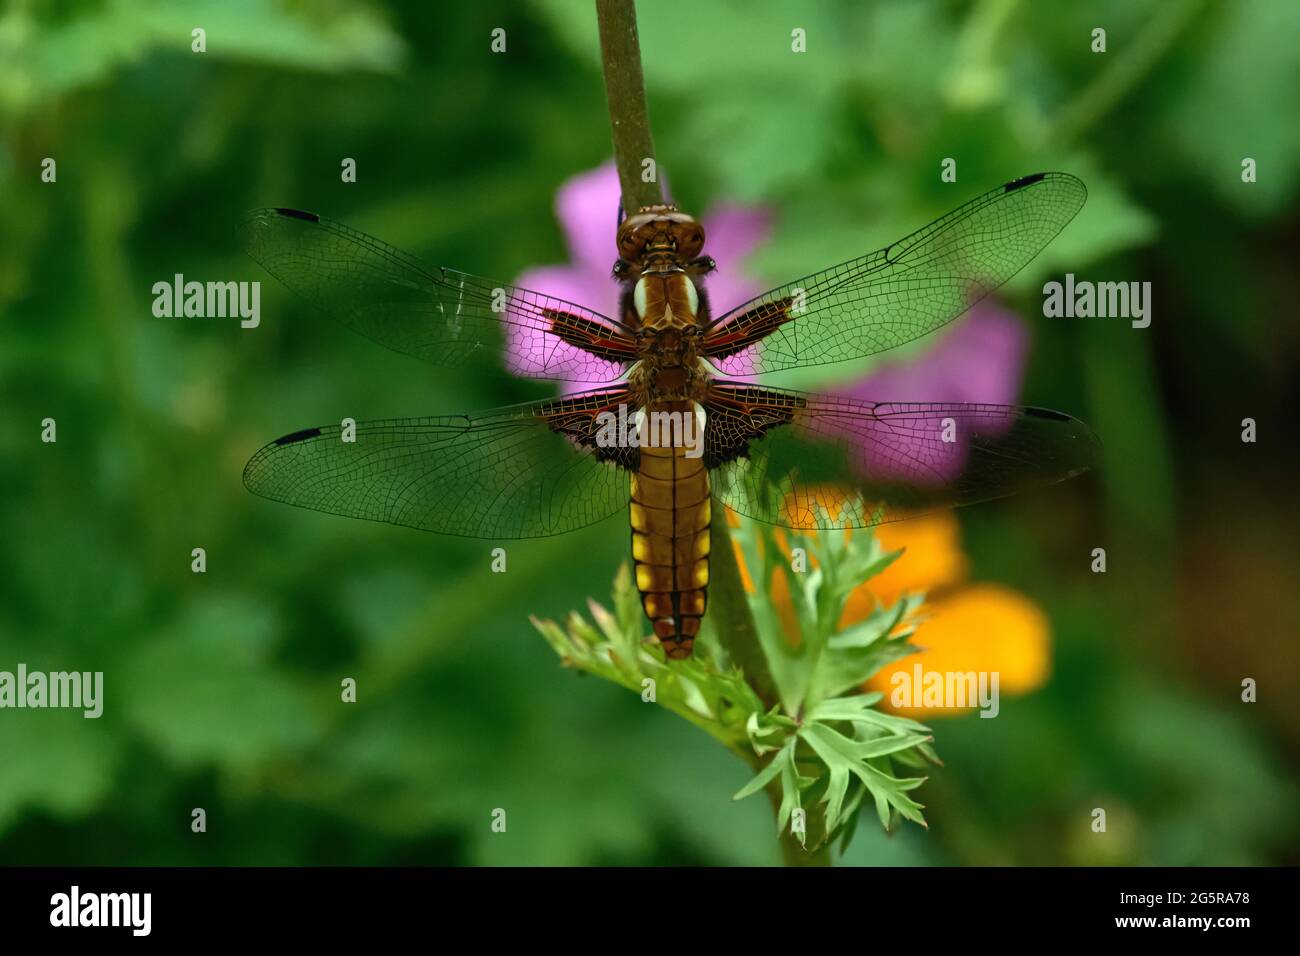 Female Broad-bodied Chaser dragonfly Stock Photo